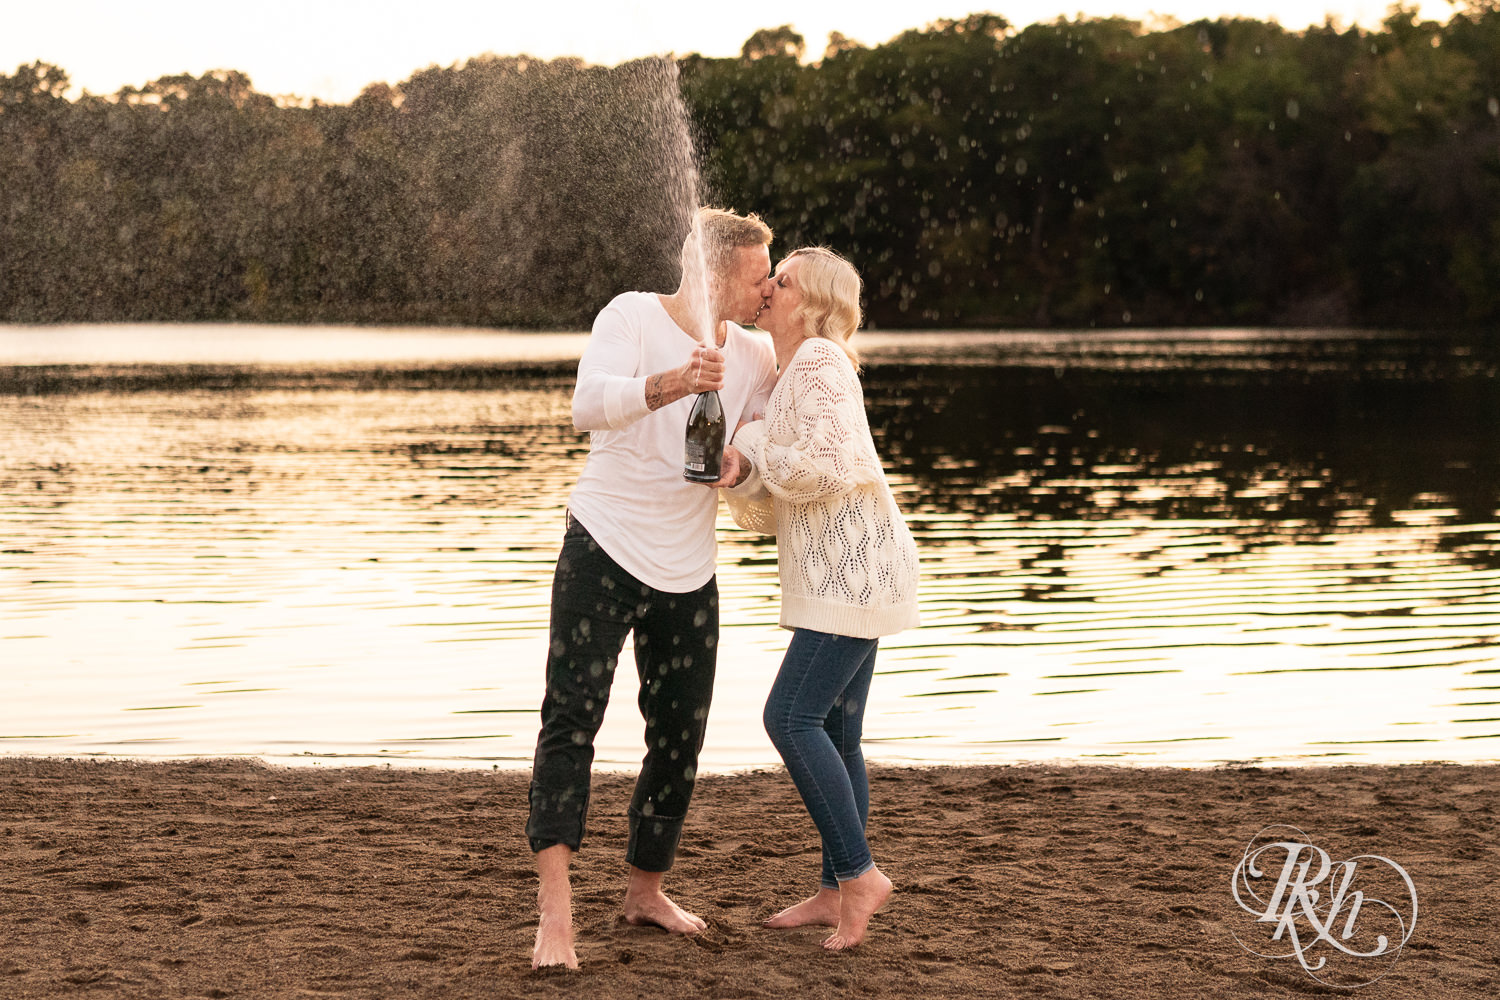 Blond woman and man in white shirts and jeans spray champagne on the beach at Lebanon Hills Regional Park in Eagan, Minnesota.